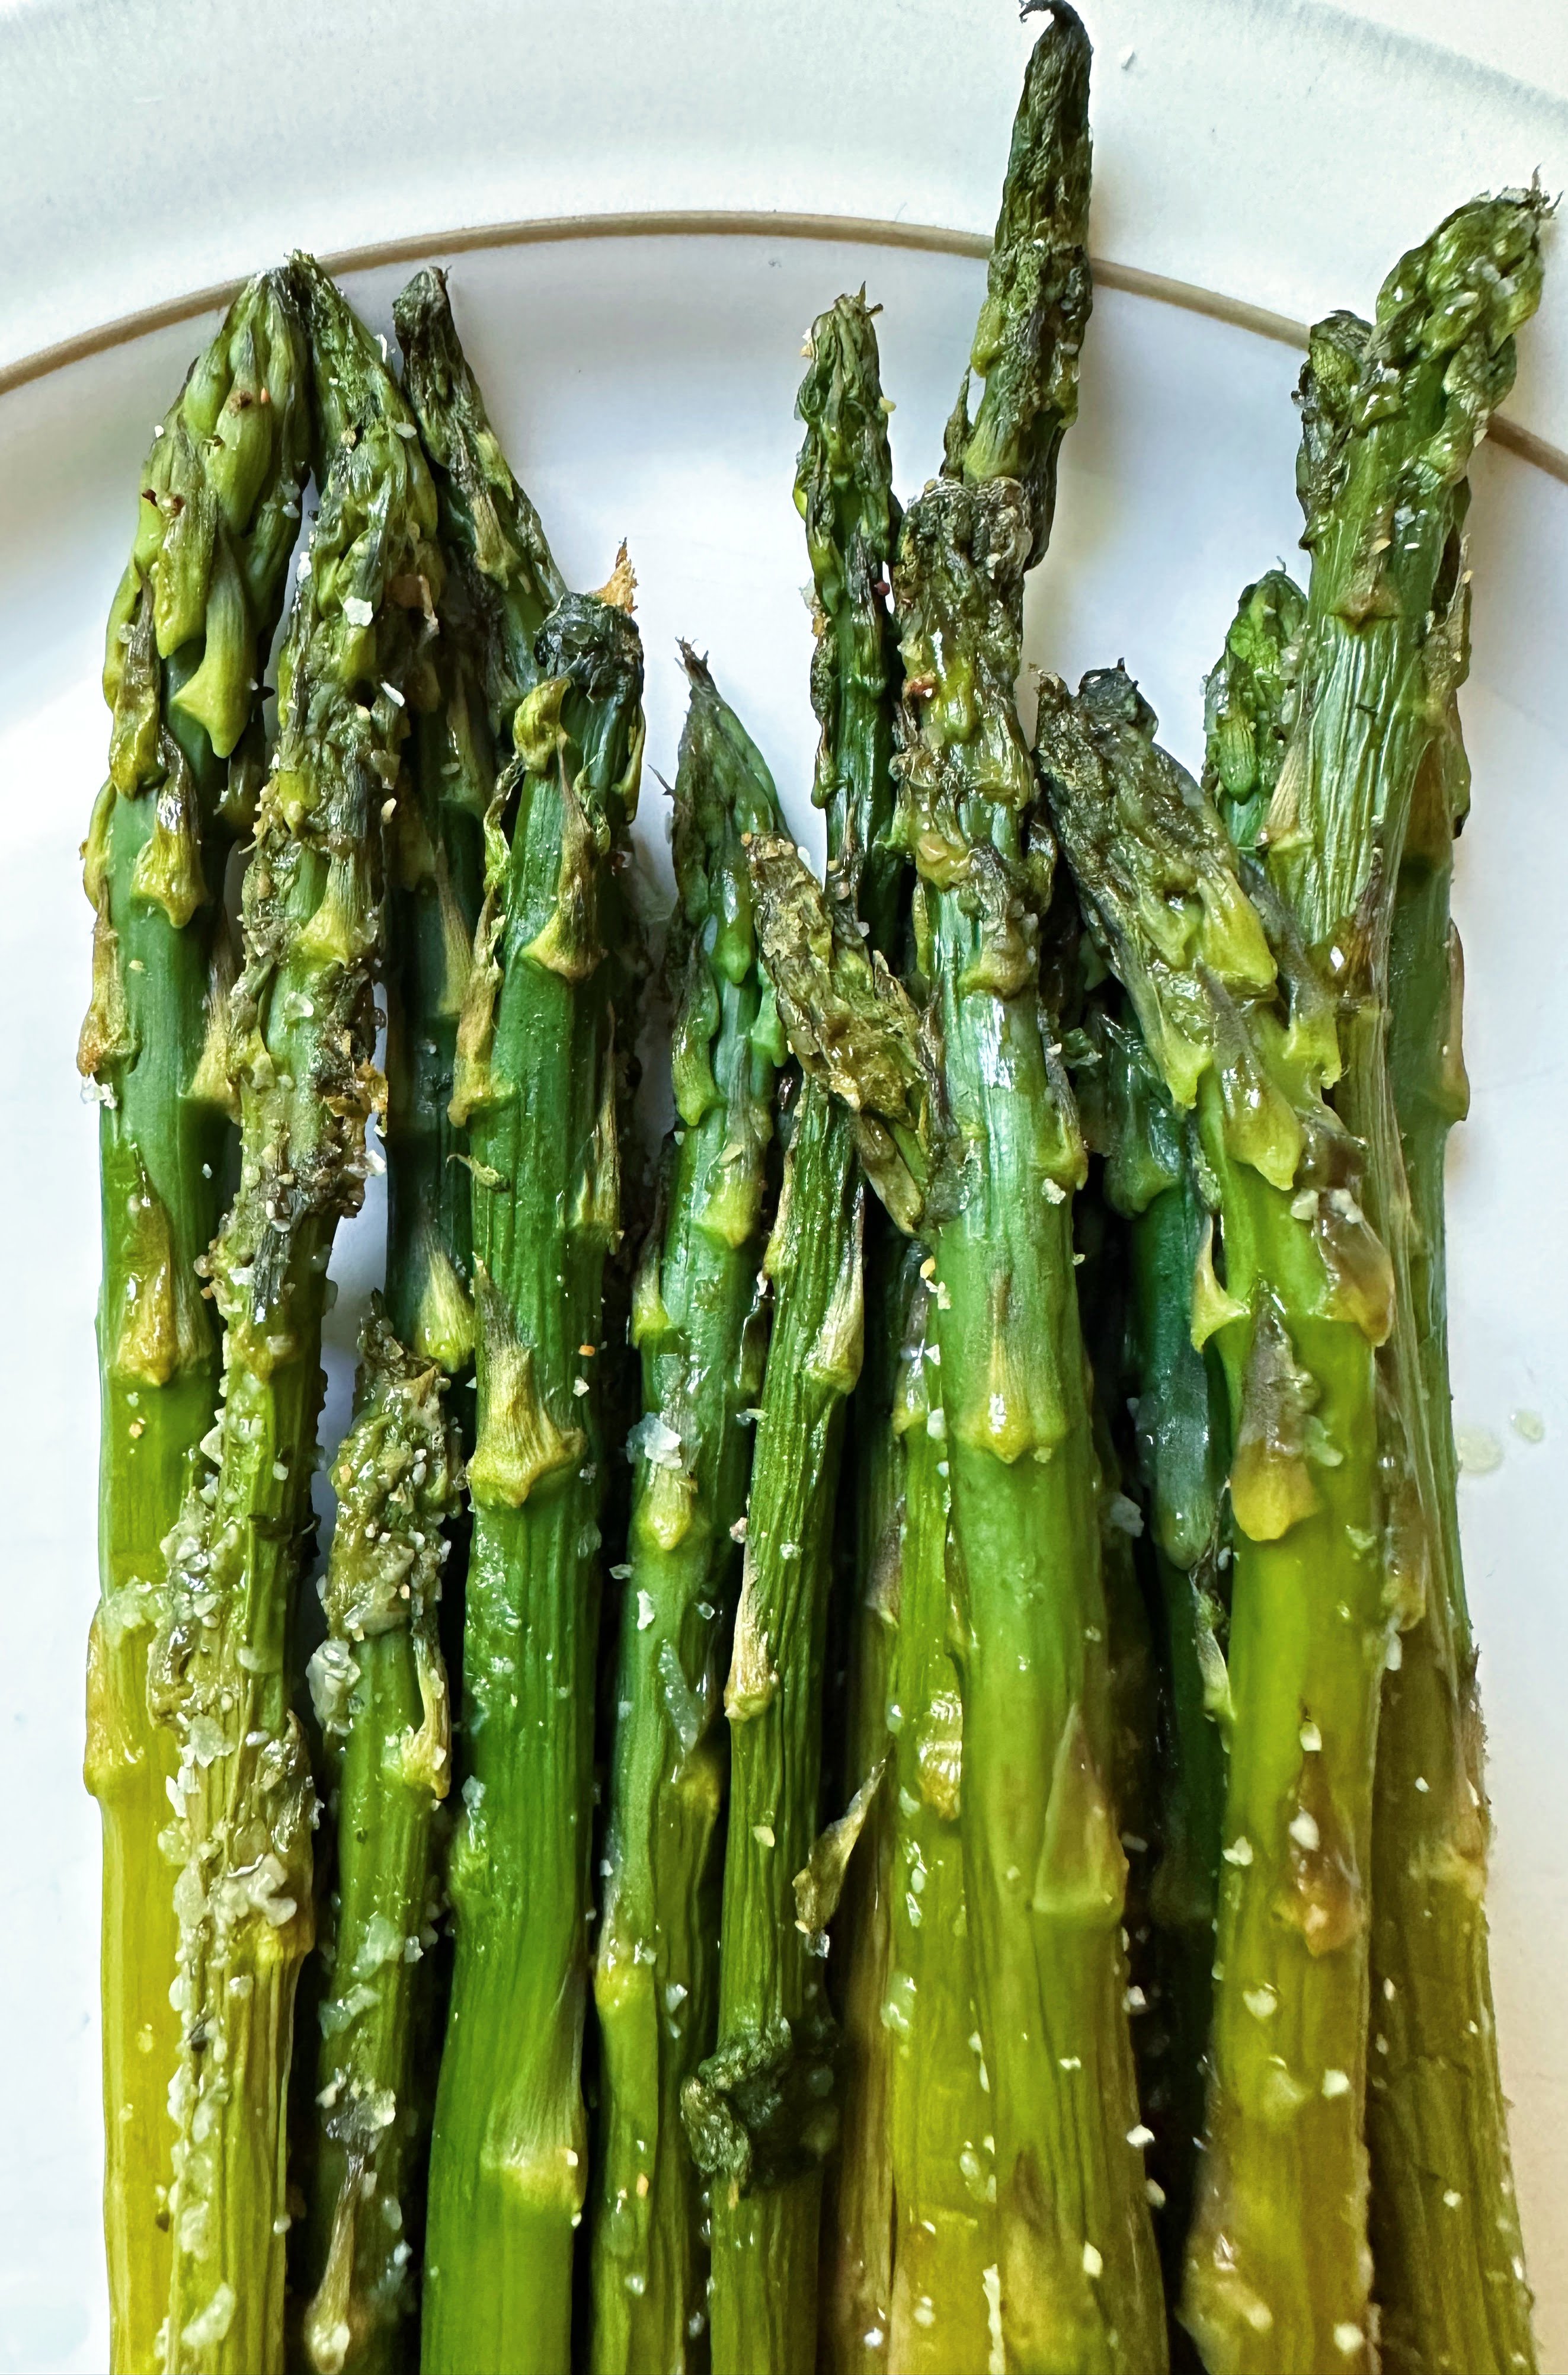 Finished garlic Roasted asparagus on a plate